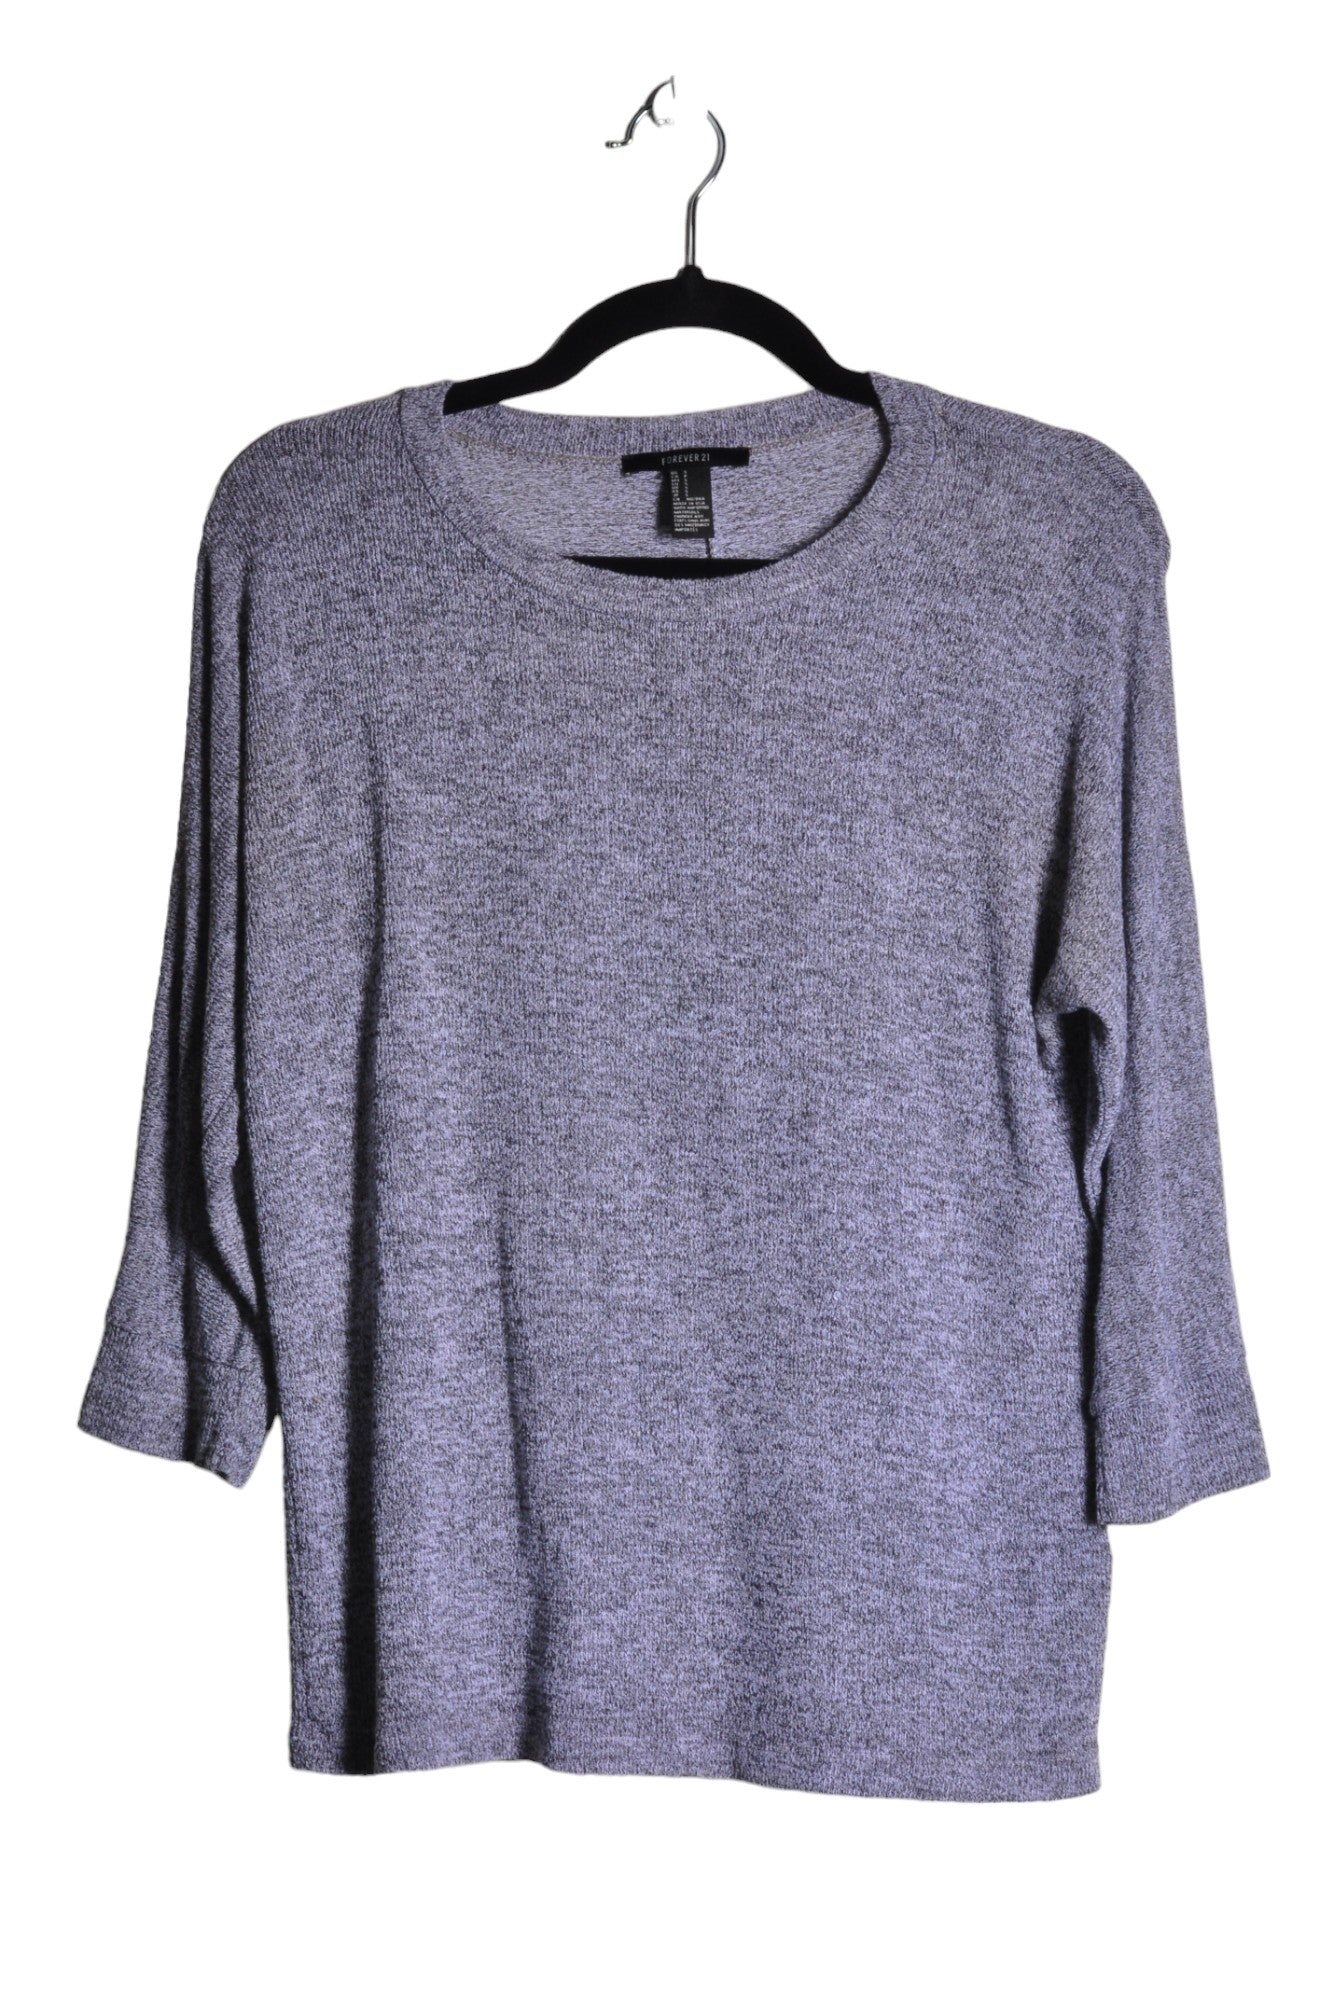 FOREVER 21 Women T-Shirts Regular fit in Gray - Size S | 8.8 $ KOOP